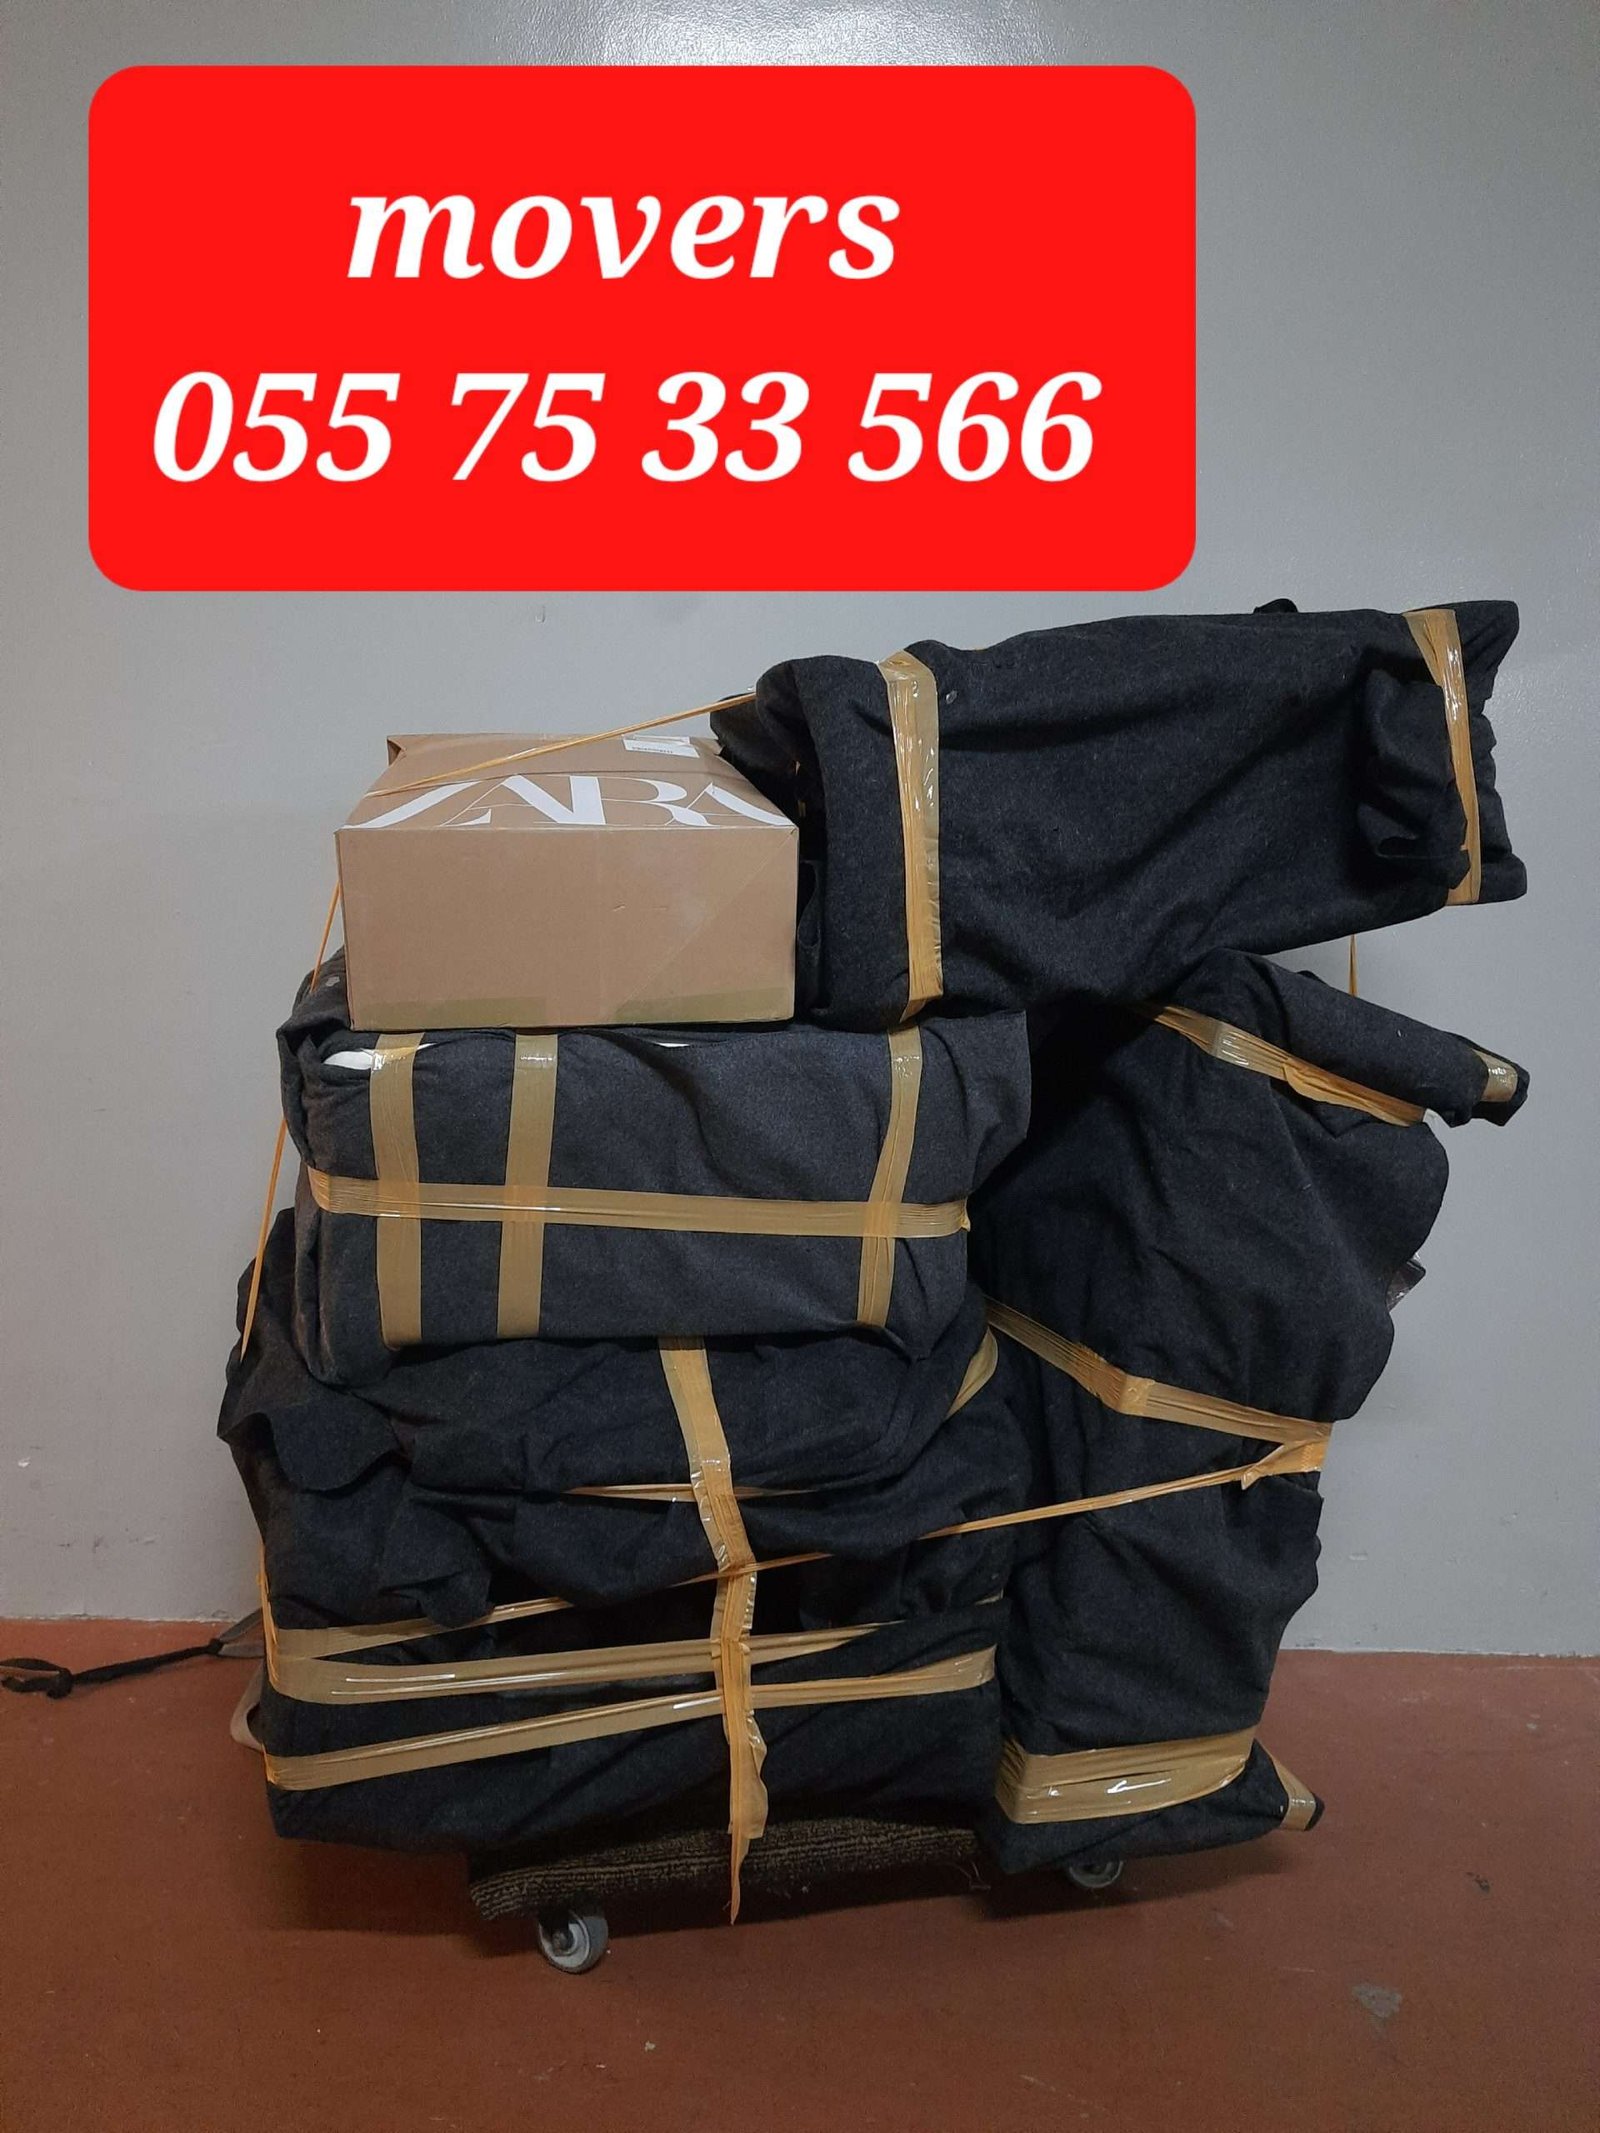 MOVERS AND PACKERS PICKUP TRUCK 055 75 33 566